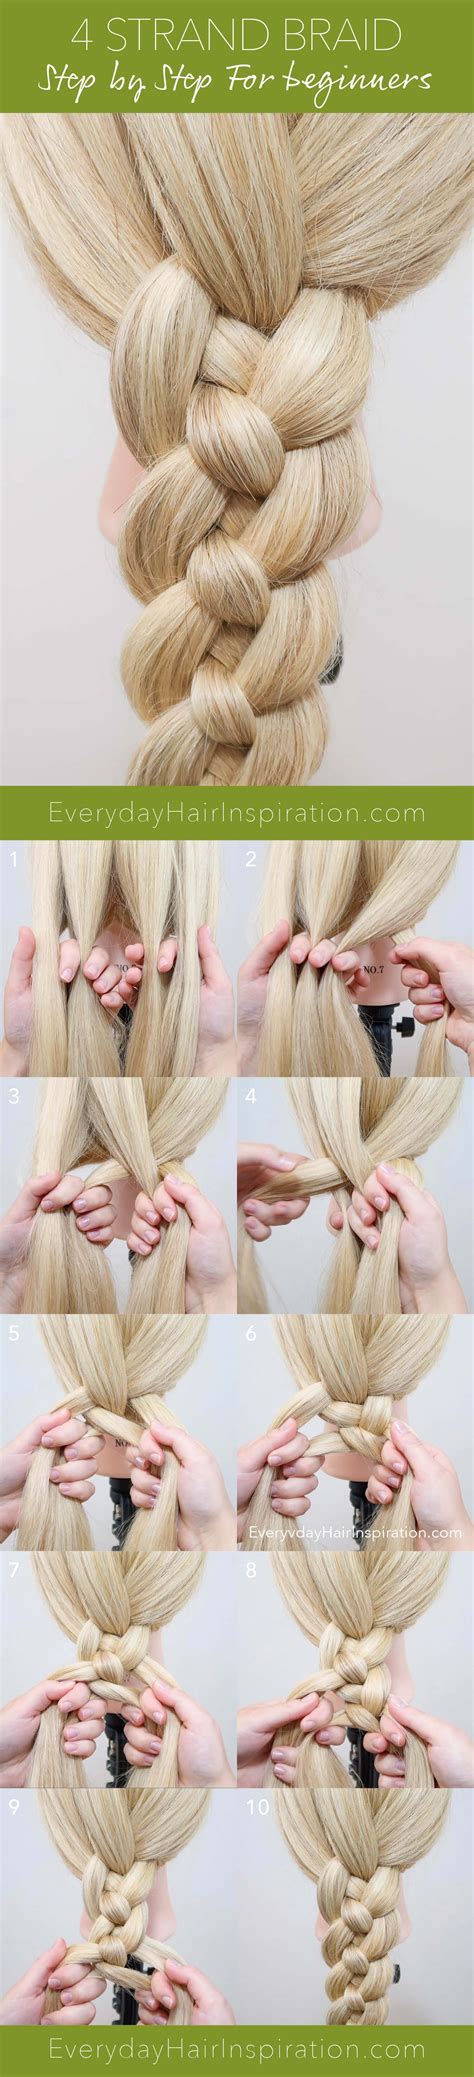 They should keep that way for a few days. How To 4 Strand Braid - Everyday Hair inspiration - BRAIDED STYLES